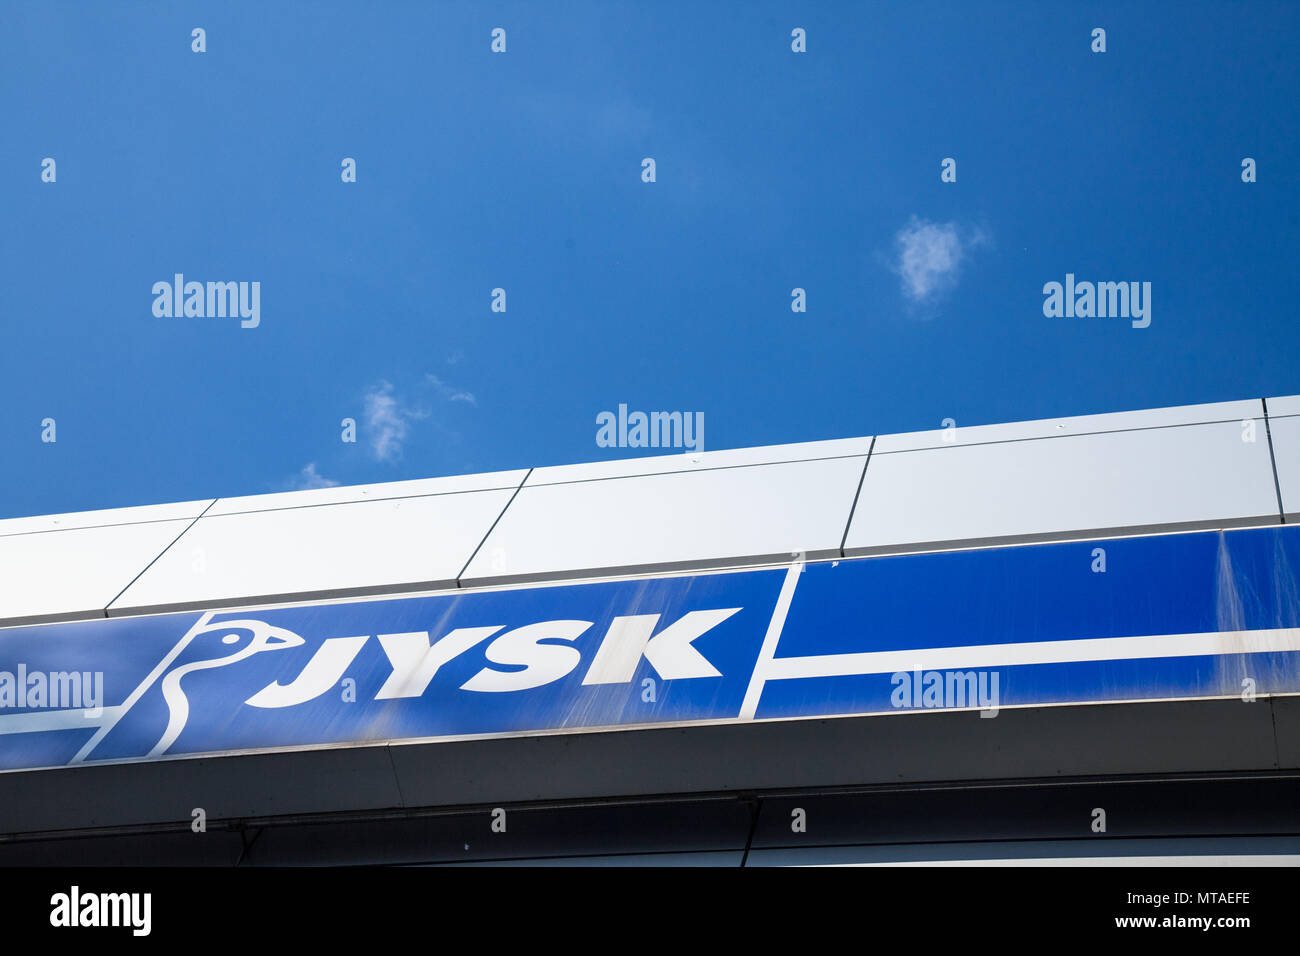 INDJIJA, SERBIA - MAY 20, 2018: Jysk logo on their local shop in Indjija. Jysk is a Danish retail chain, selling household goods  Picture of a Jysk Si Stock Photo